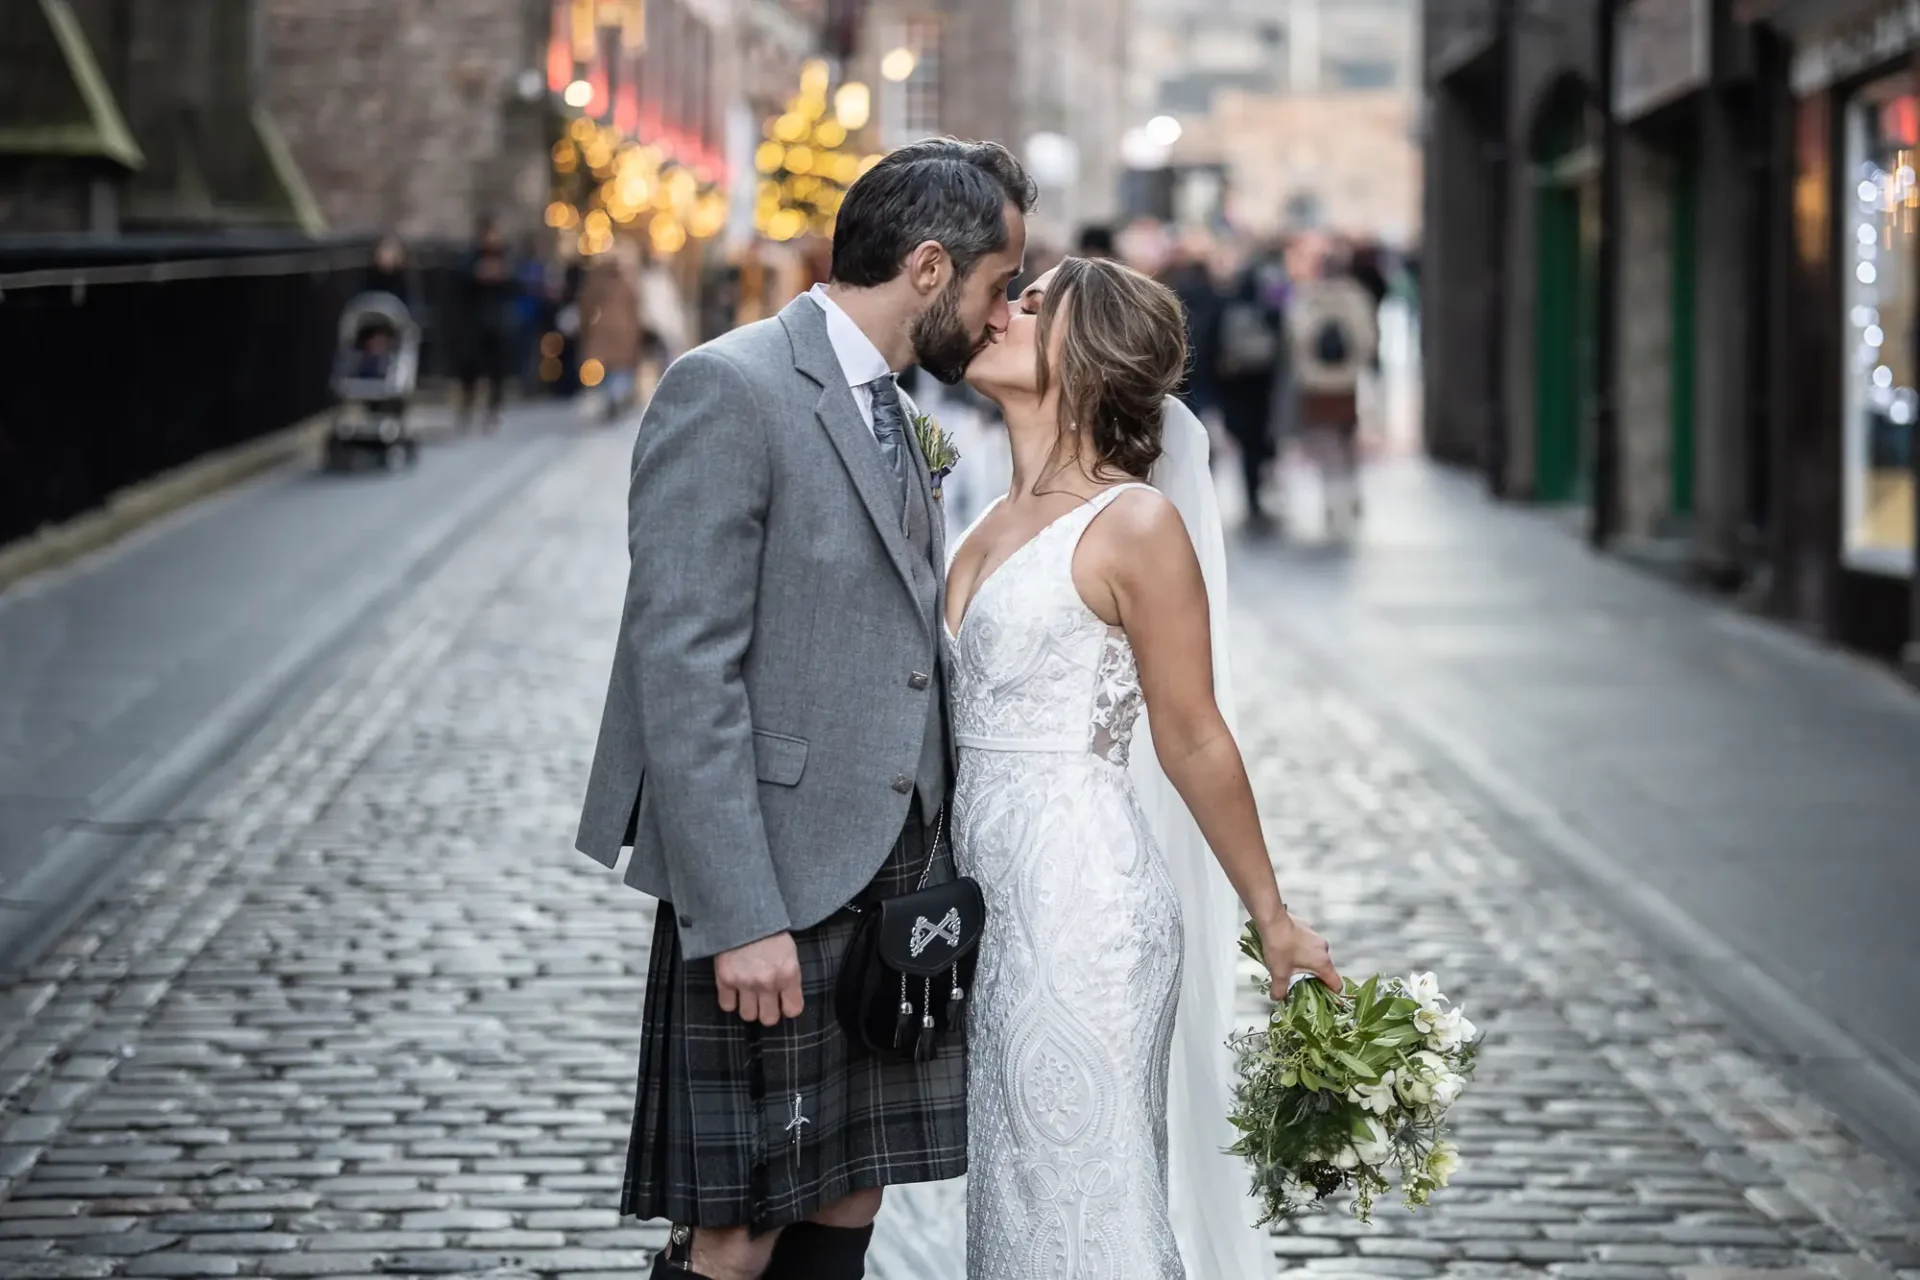 A bride and groom kiss in the middle of a cobblestone street, with the groom wearing a kilt and the bride in a white dress, carrying a bouquet.